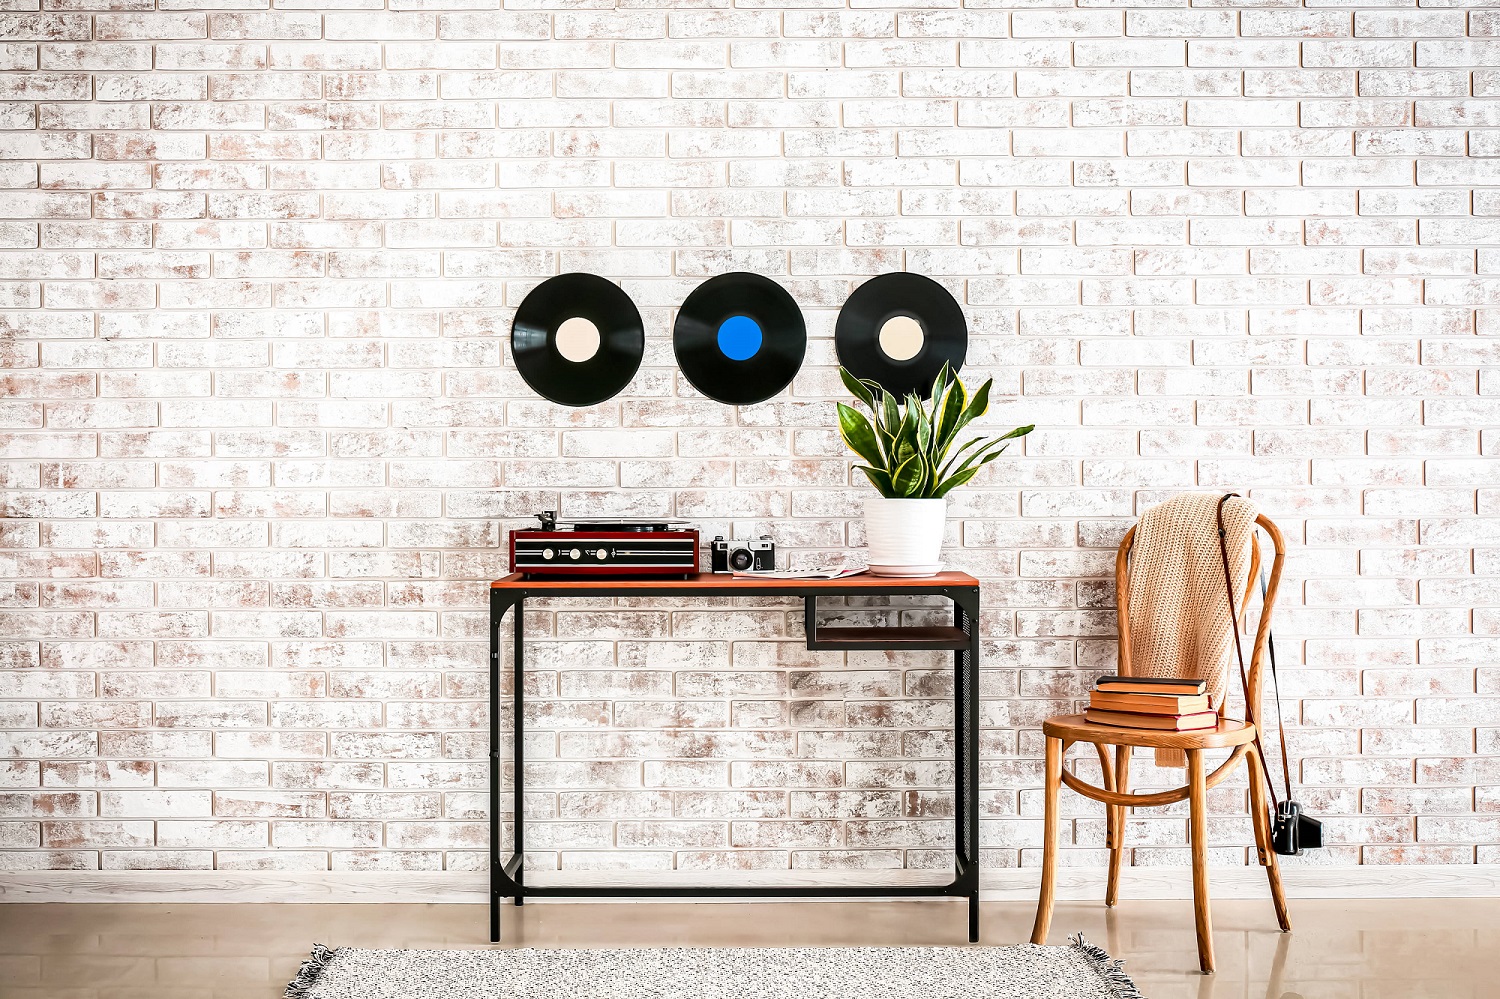 Dad’s favorite vinyl records are displayed on the wall in his home office.